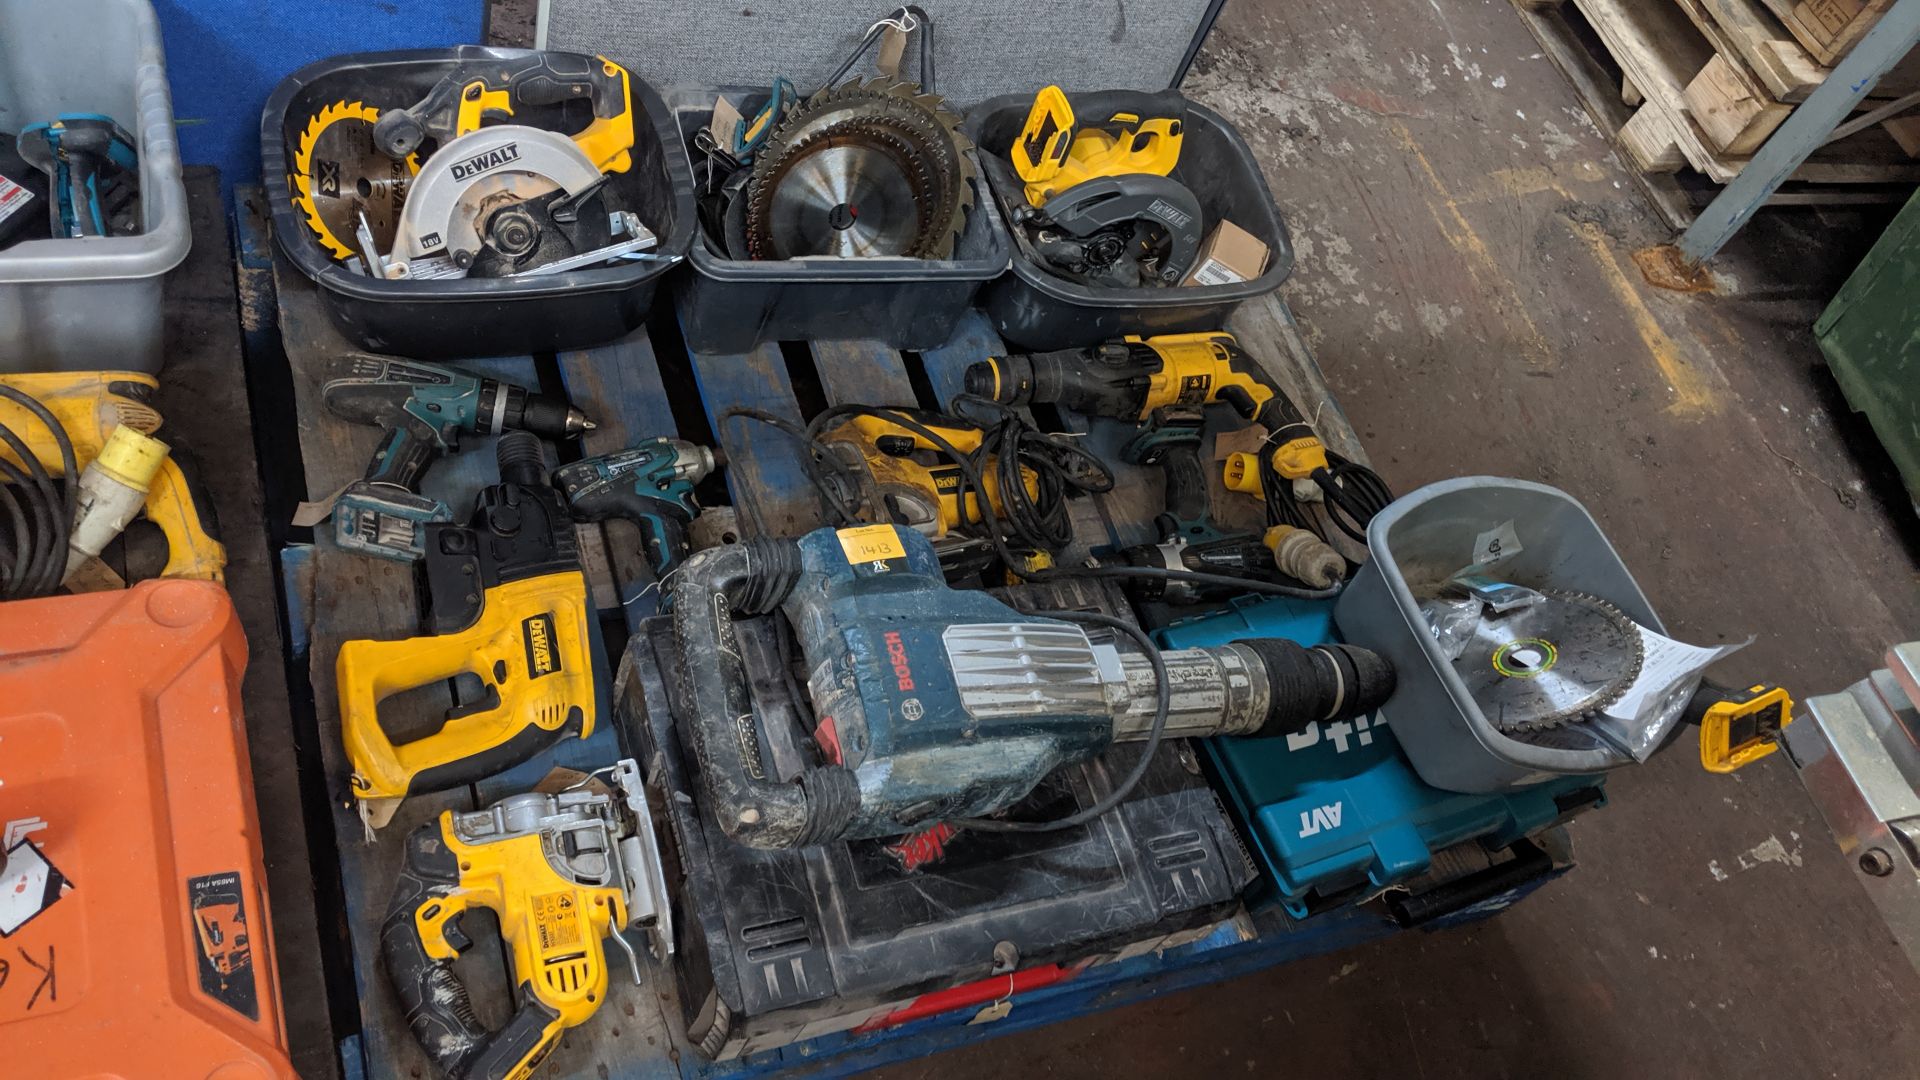 Contents of a pallet of assorted power tools. This is one of a number of lots that relate to a power